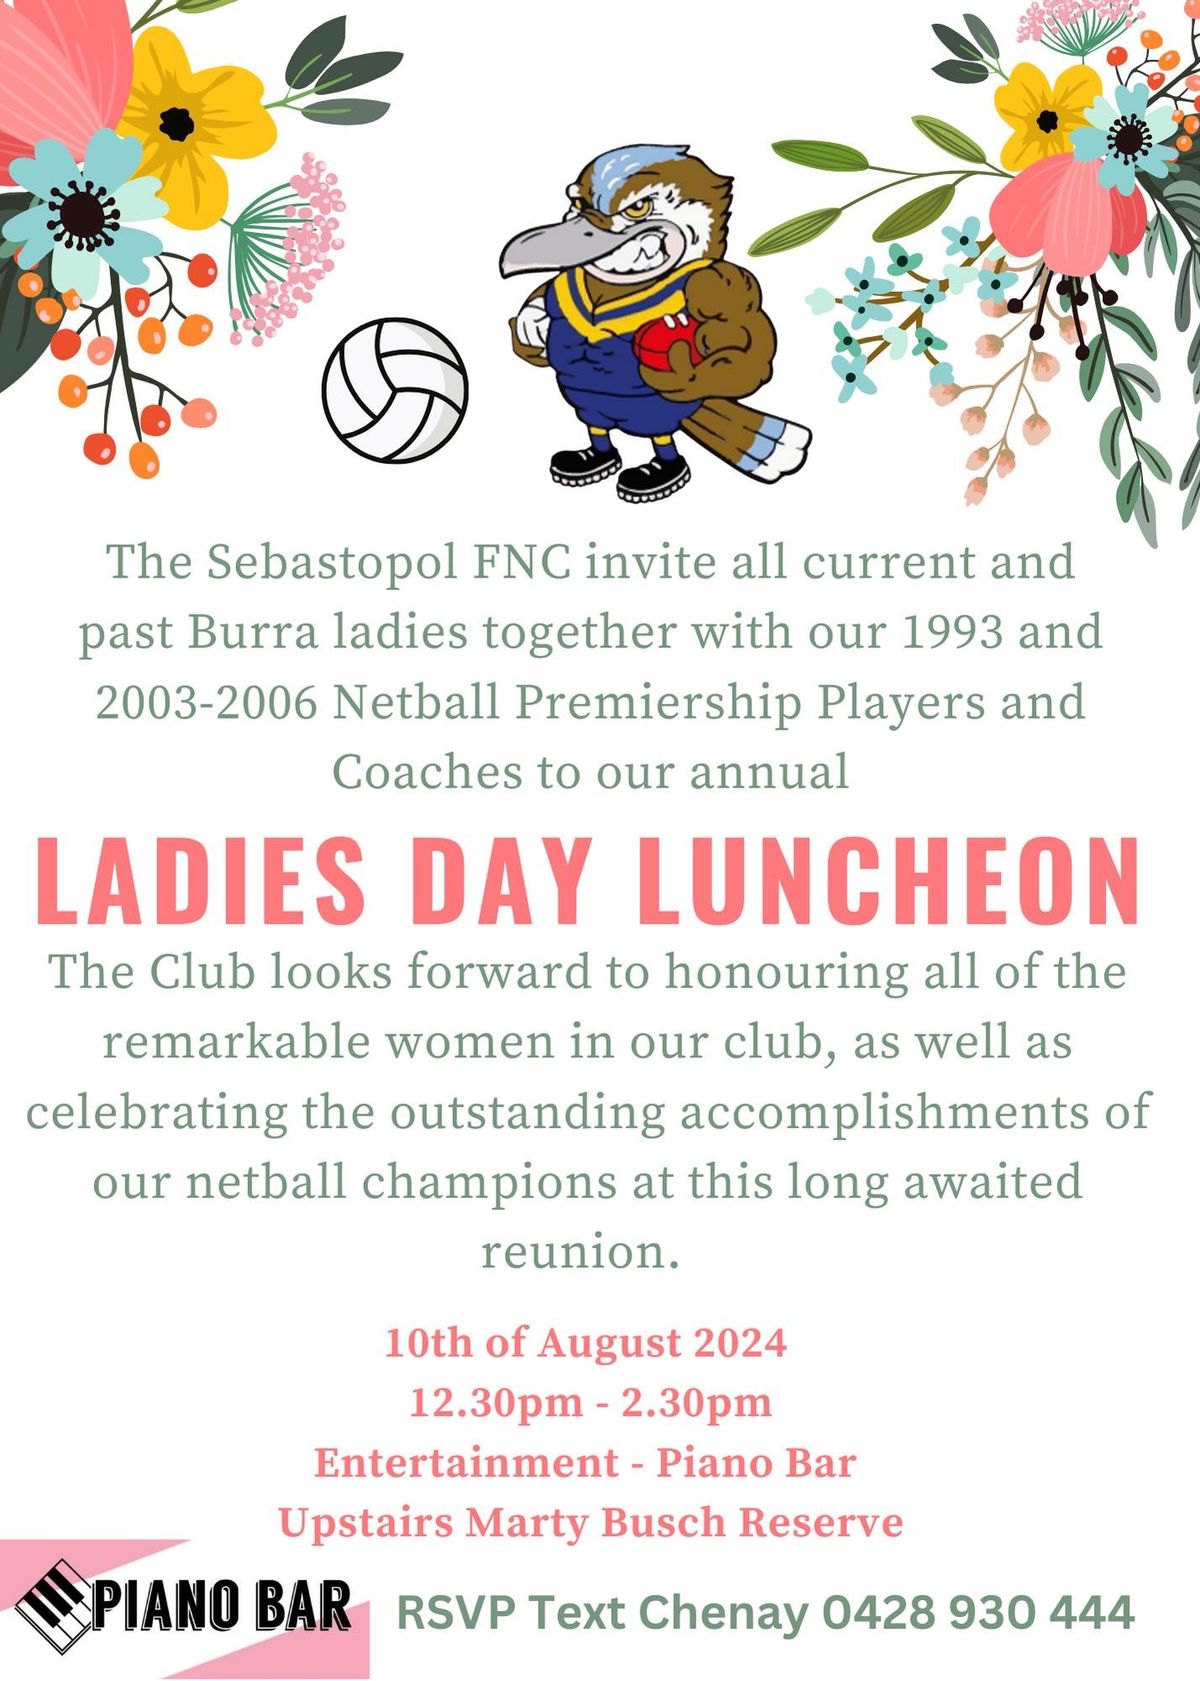 Ladies Day Luncheon 